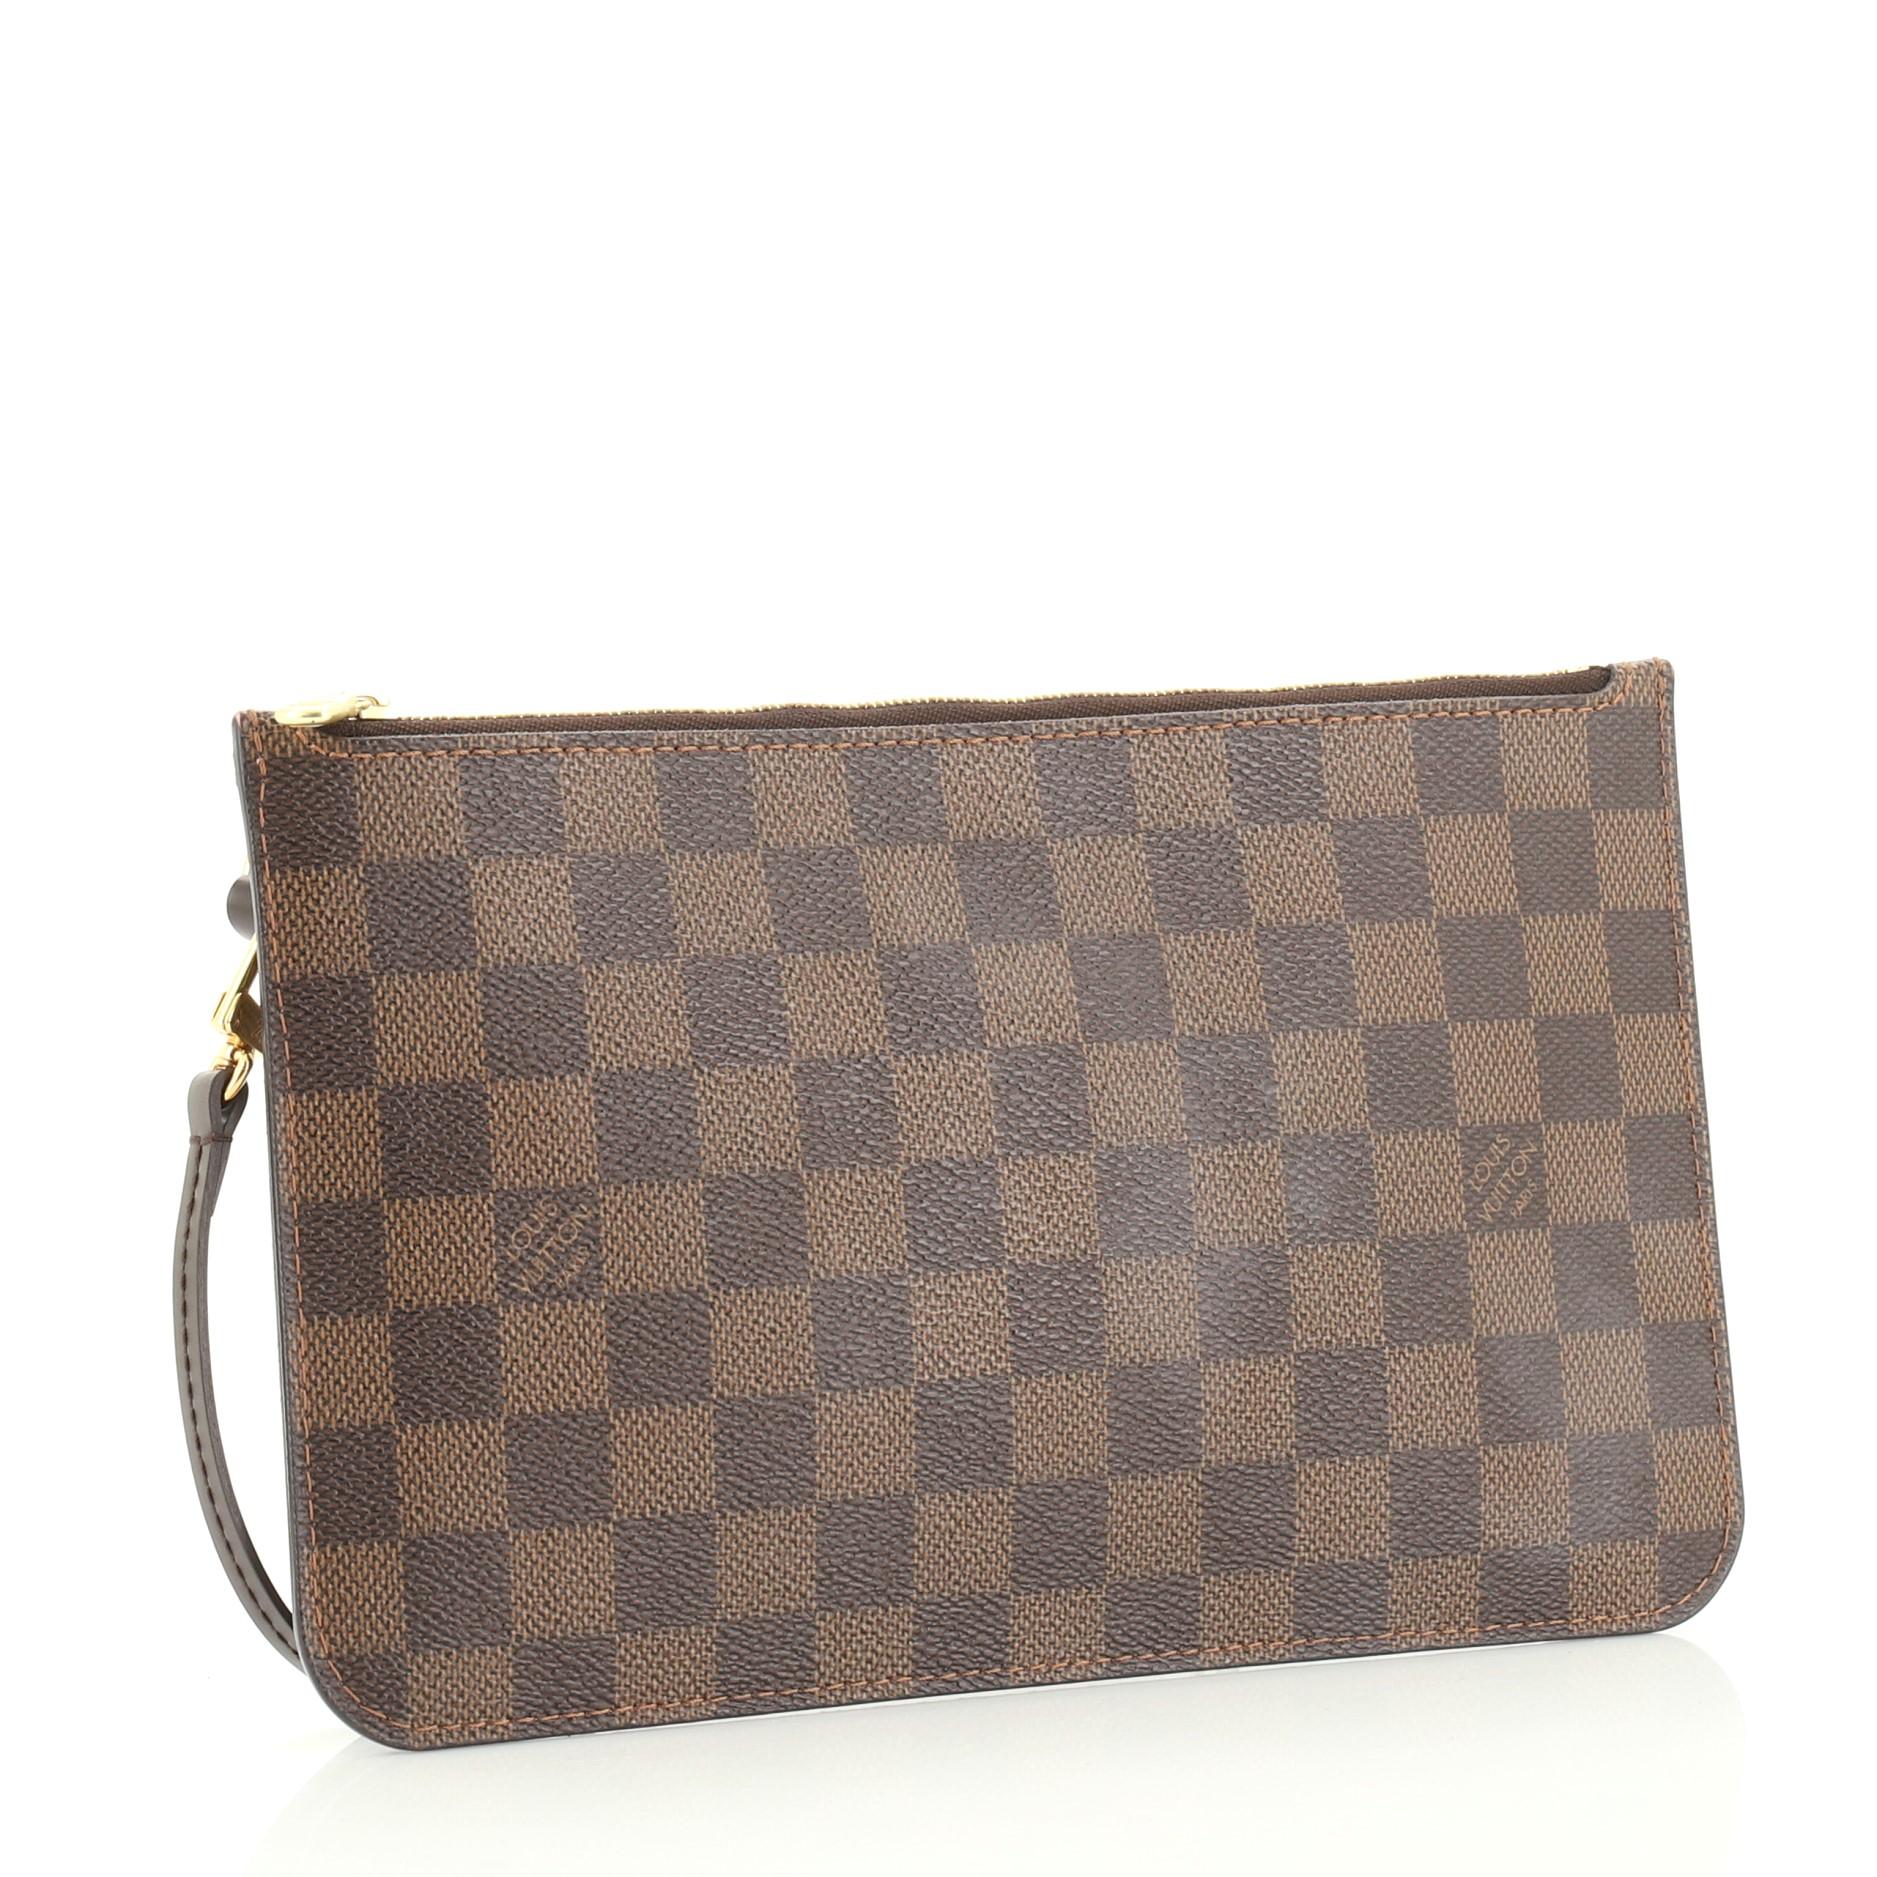 This Louis Vuitton Neverfull Pochette Damier Large, crafted from damier ebene coated canvas, features leather wrist strap and gold-tone hardware. Its zip closure opens to a red fabric interior with slip pocket. Authenticity code reads: FL4156.